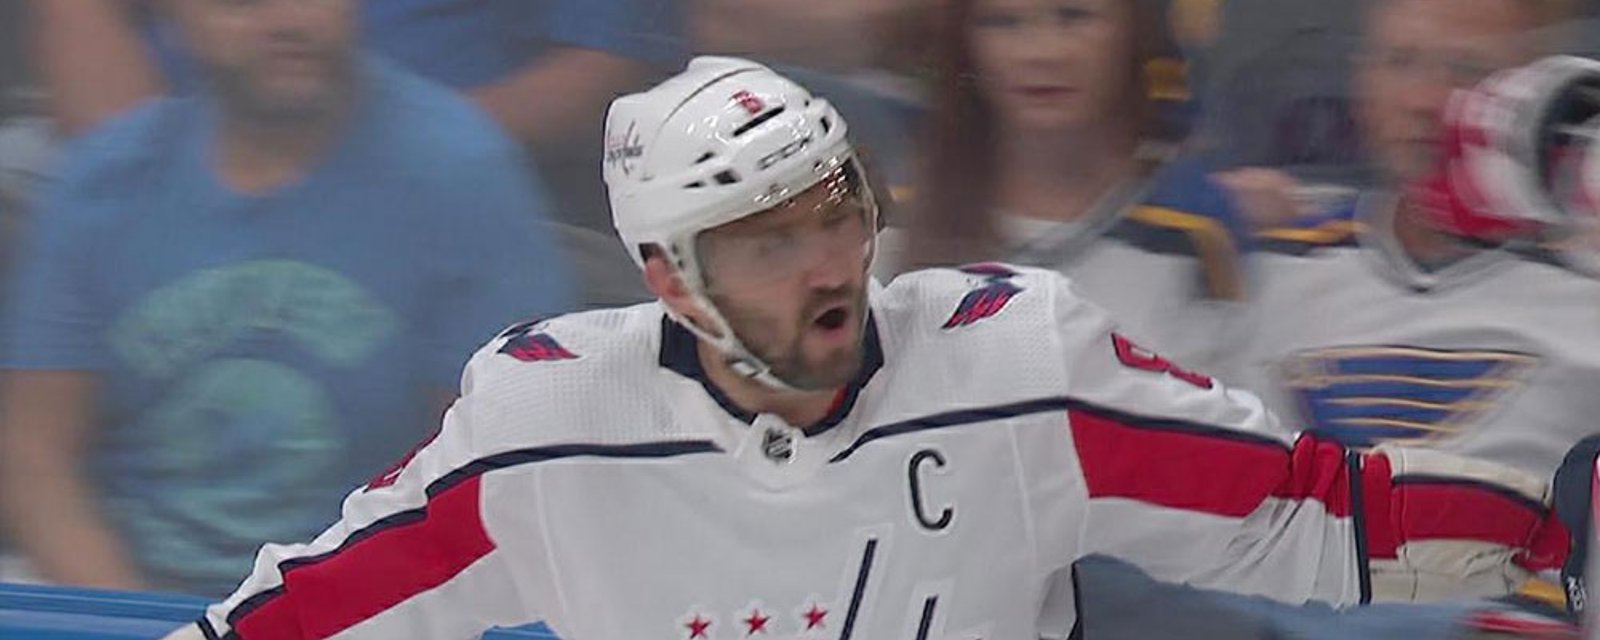 Ovechkin scores his first of the season with a remarkable effort